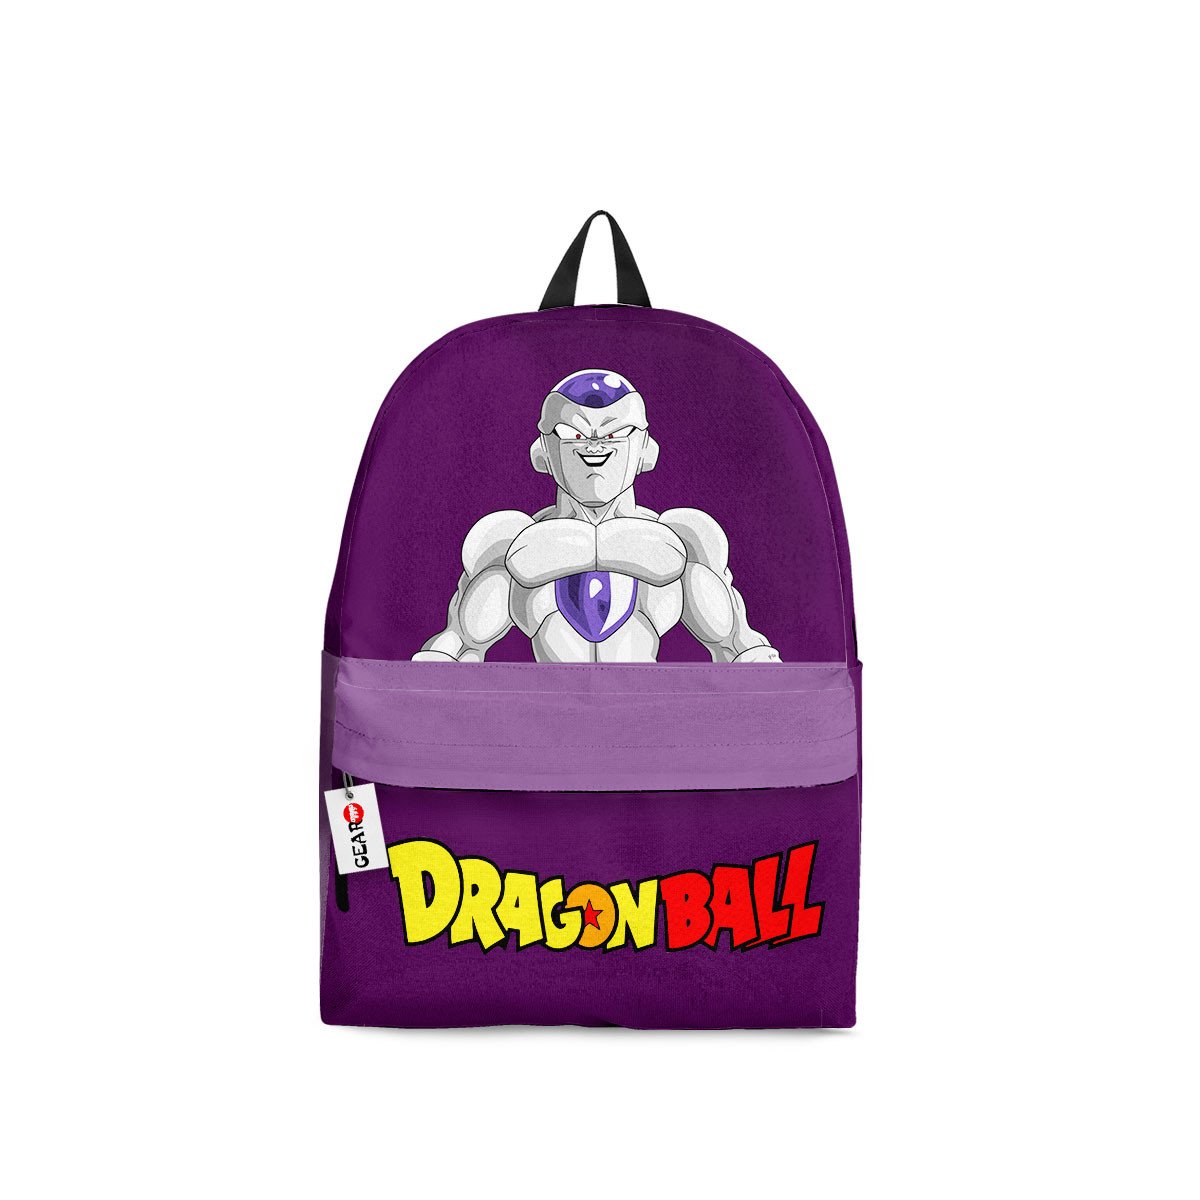 BEST Fizera Dragon Ball Anime Printed 3D Leisure Backpack